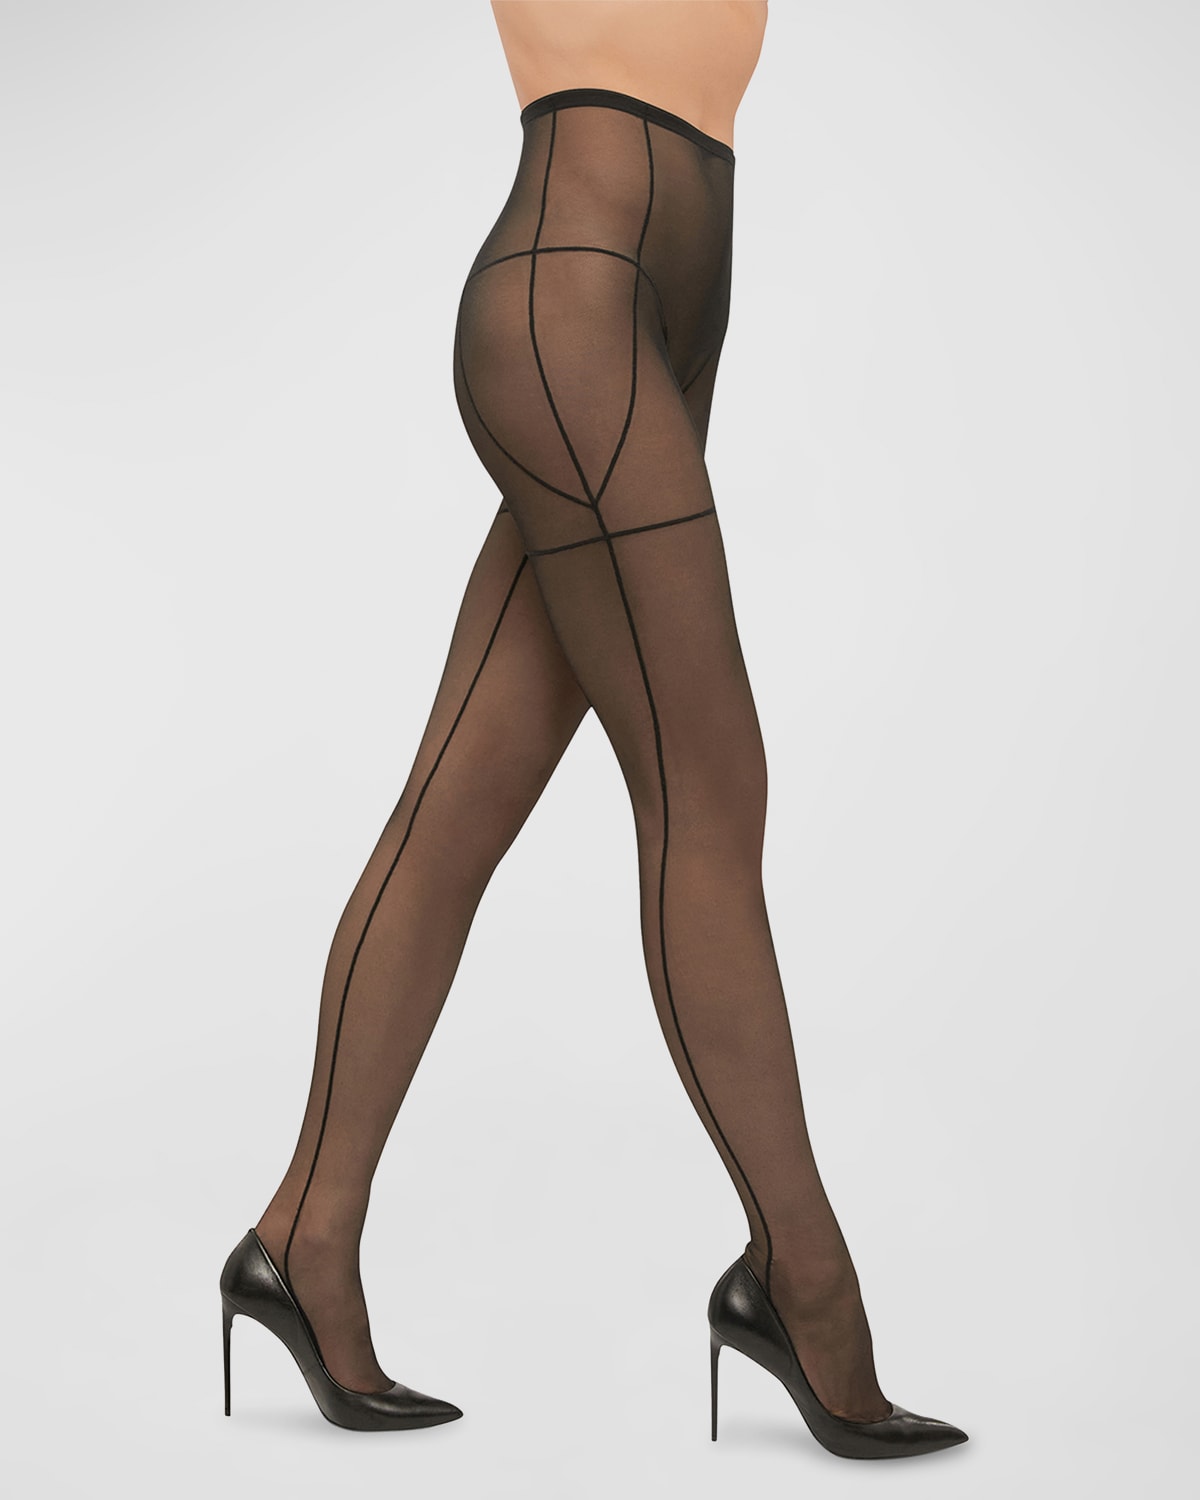 Wolford Pure 50 Basic Opaque Tights, $61, Neiman Marcus